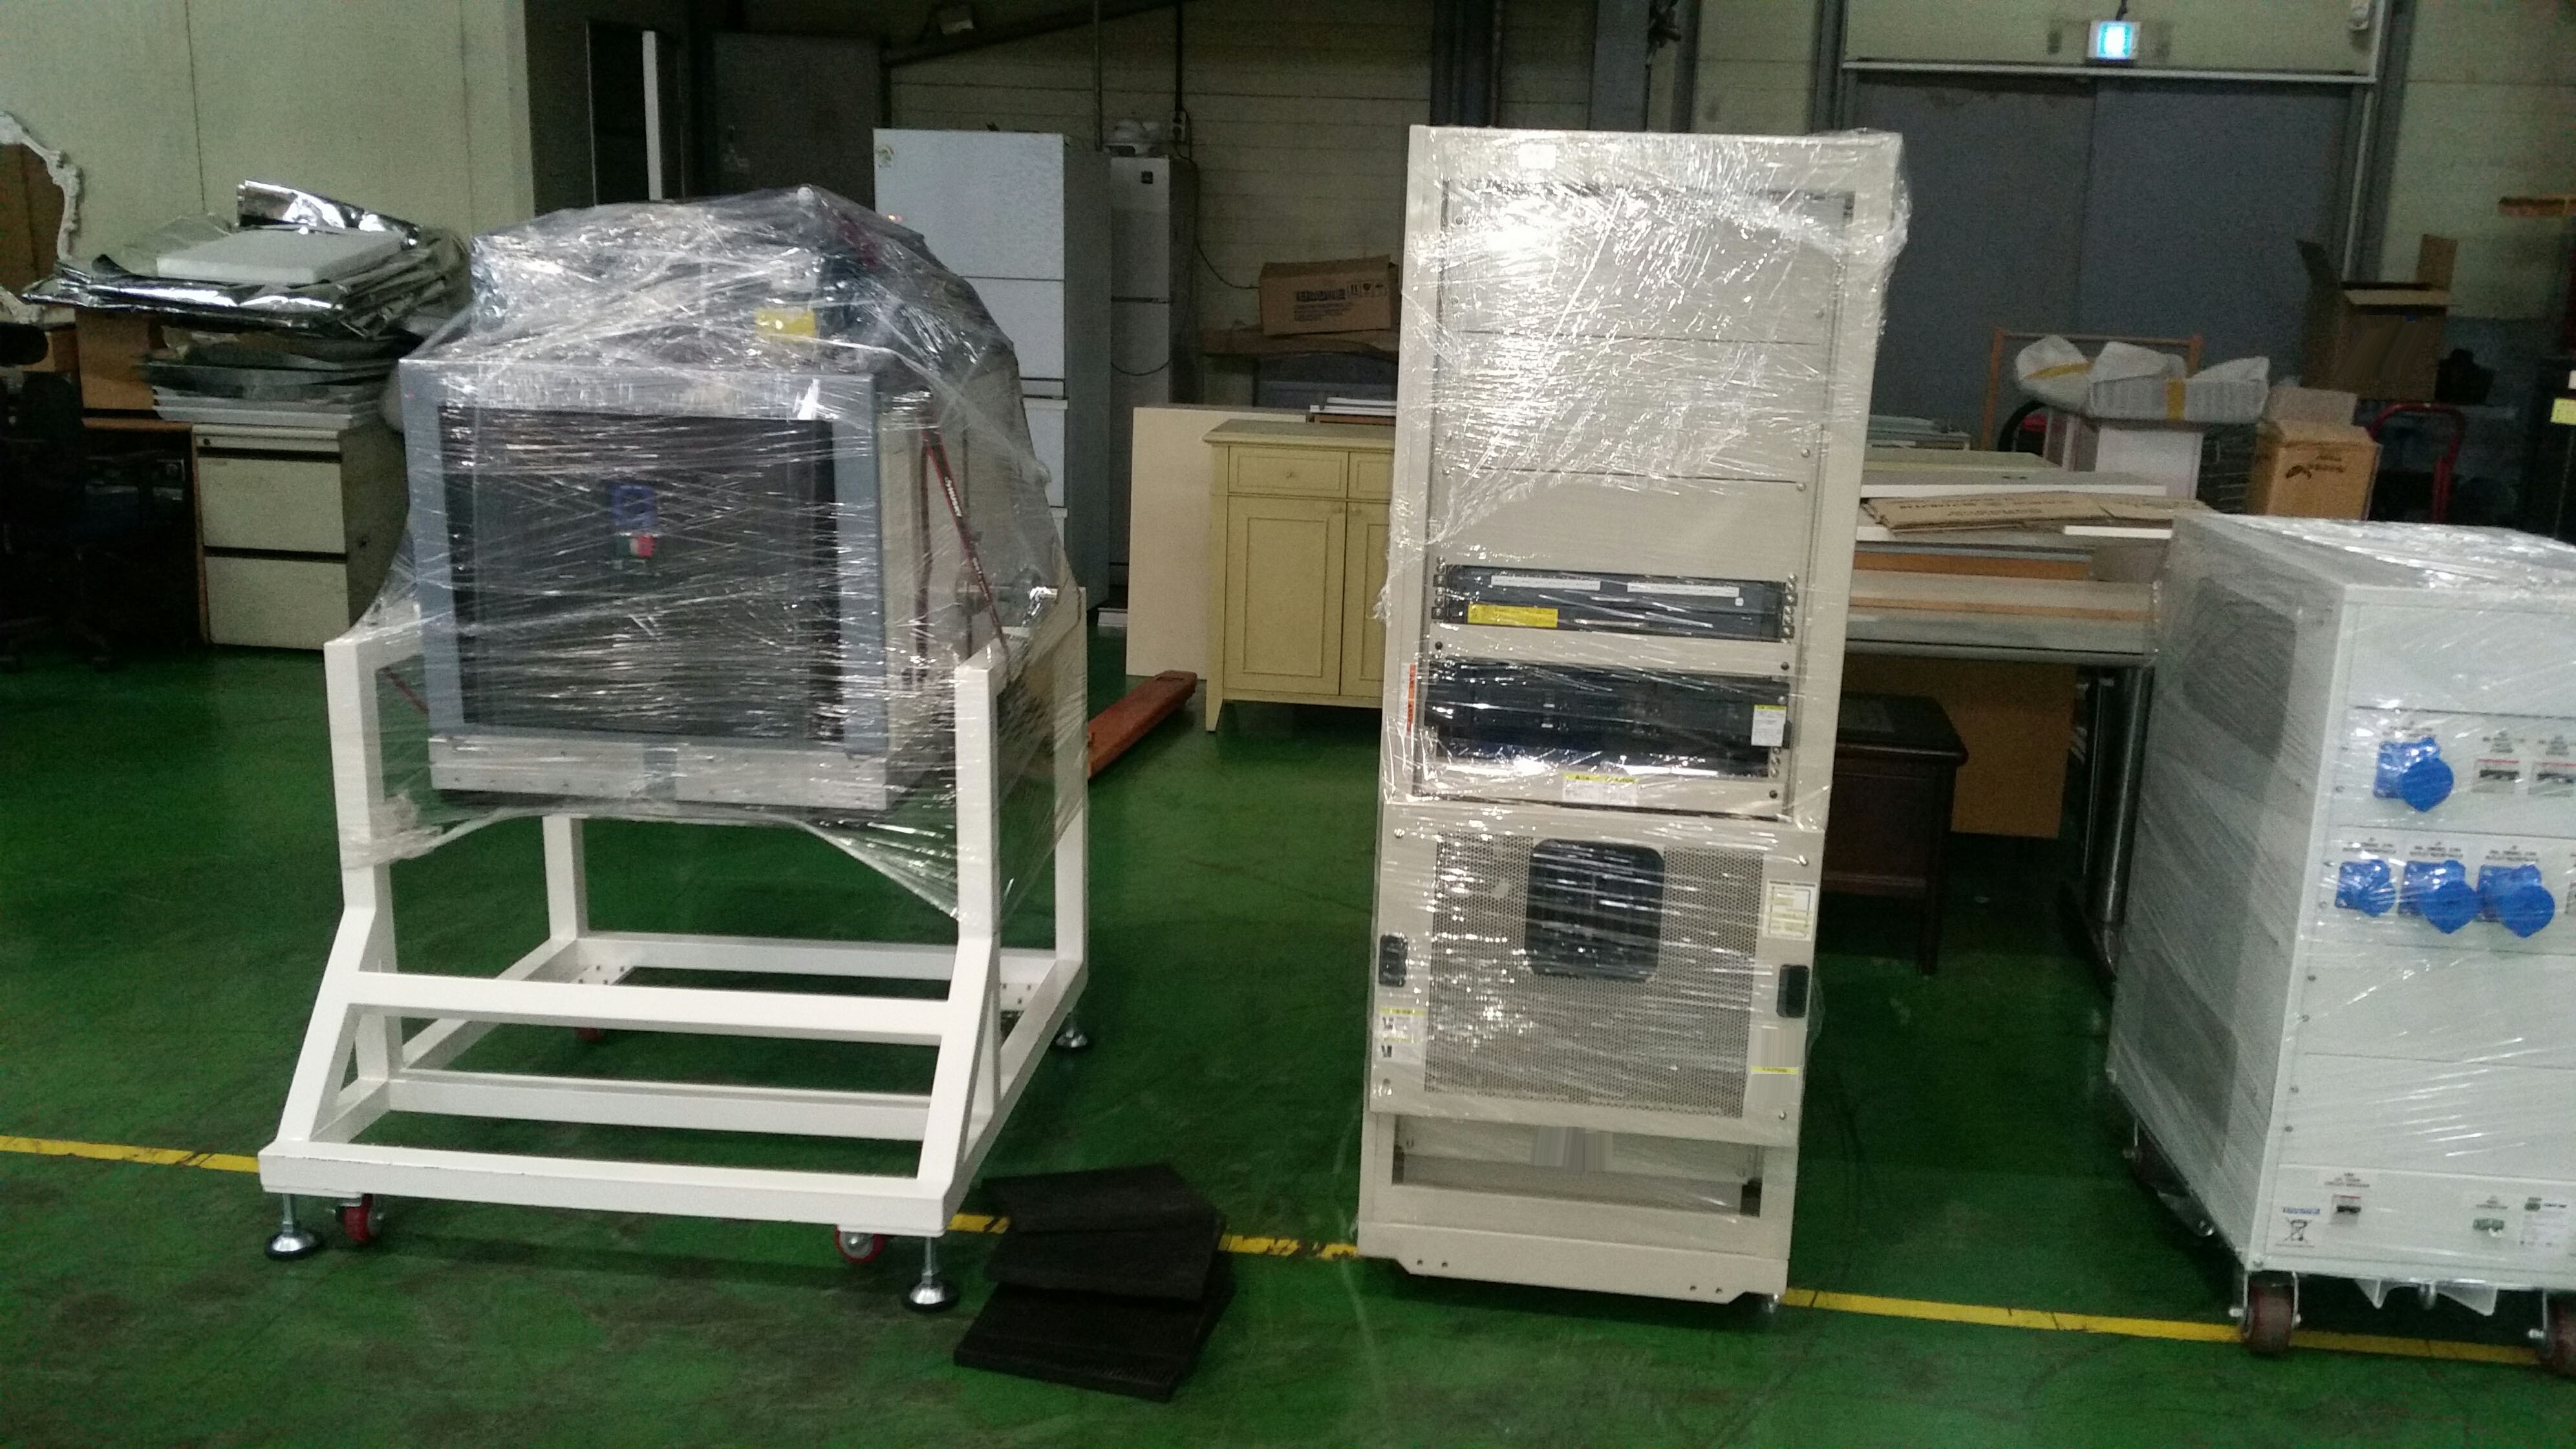 TERADYNE IP 750 EX used for sale price #9197133 > buy from CAE